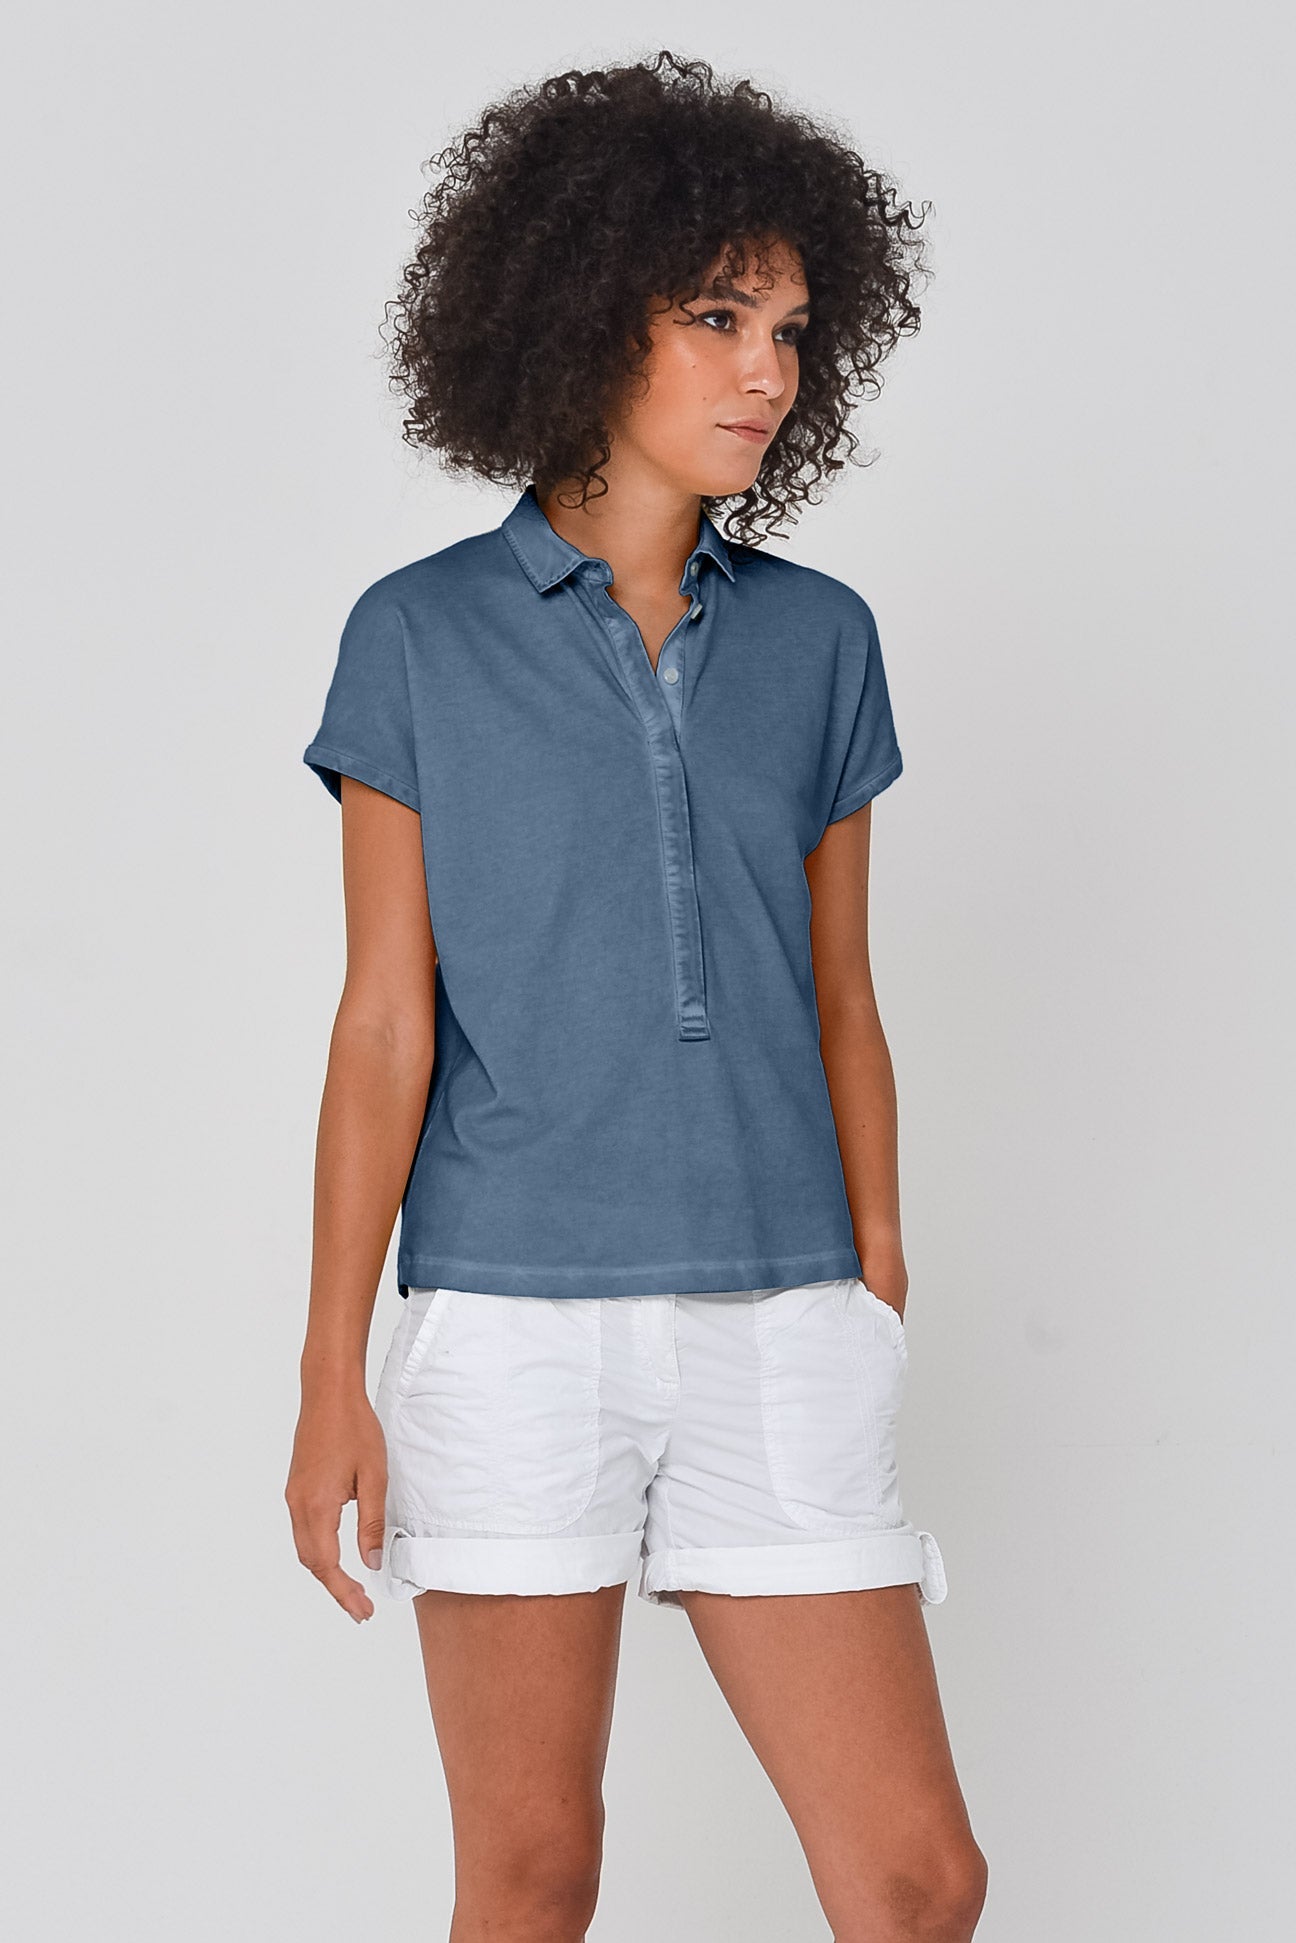 Summer Love Polo in Jeans - Polos